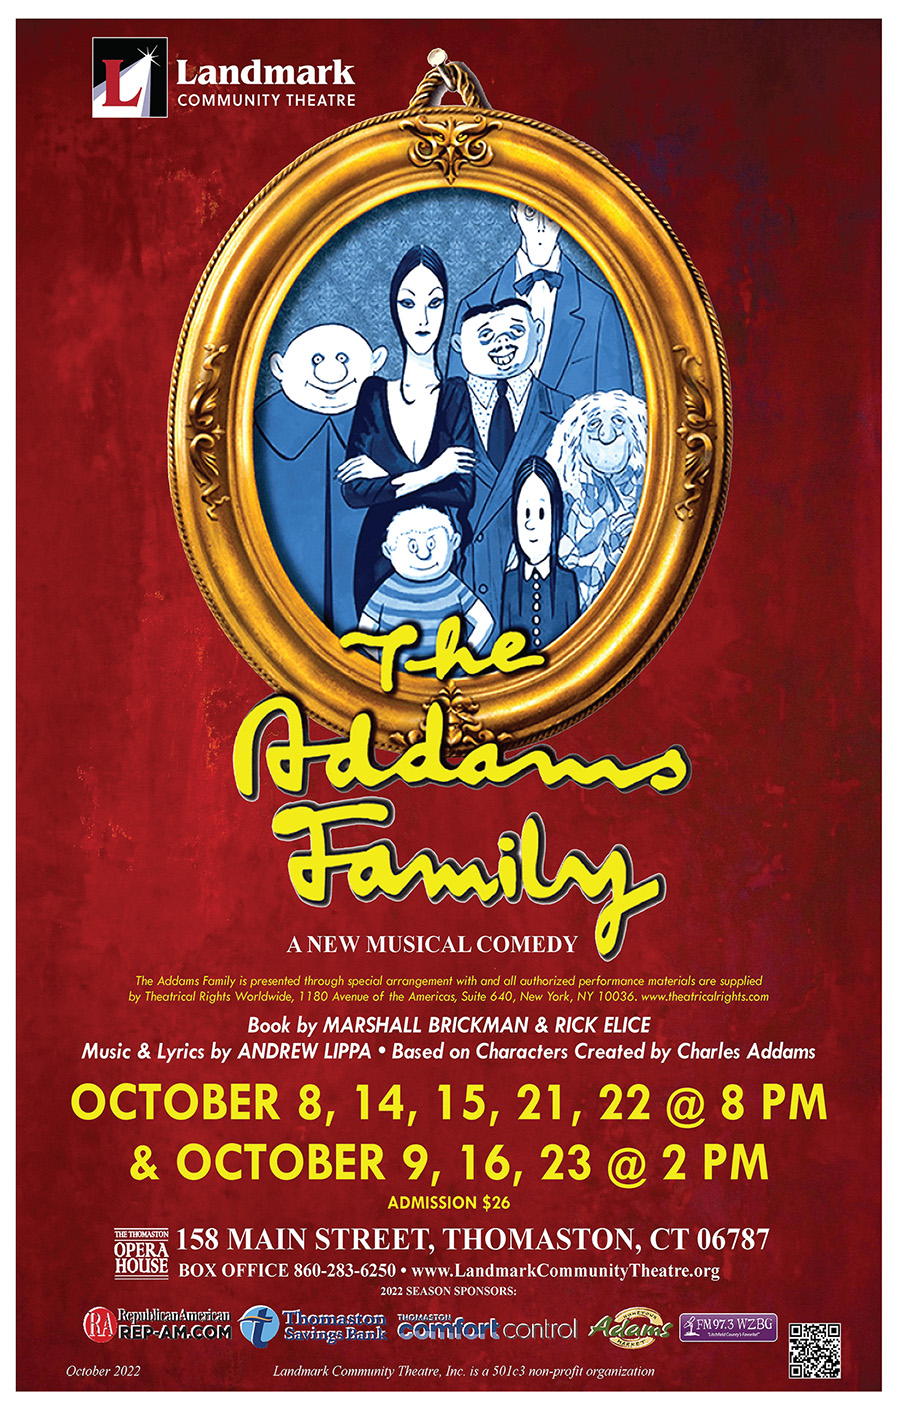 Image for THE ADDAMS FAMILY - A NEW MUSICAL COMEDY